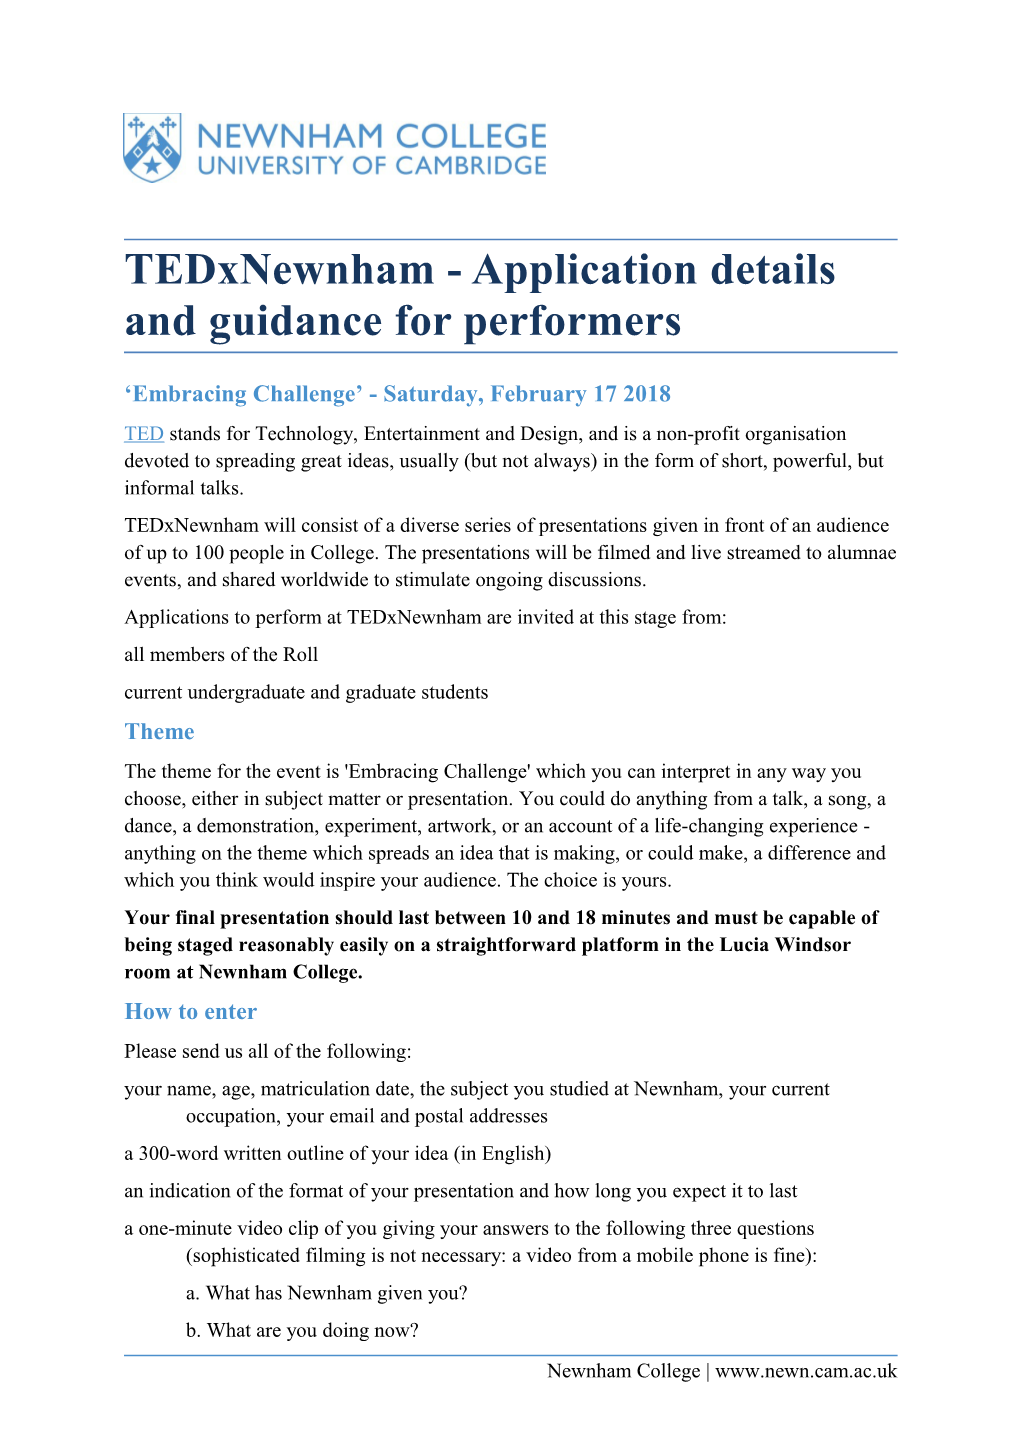 Tedxnewnham - Application Details and Guidance for Performers